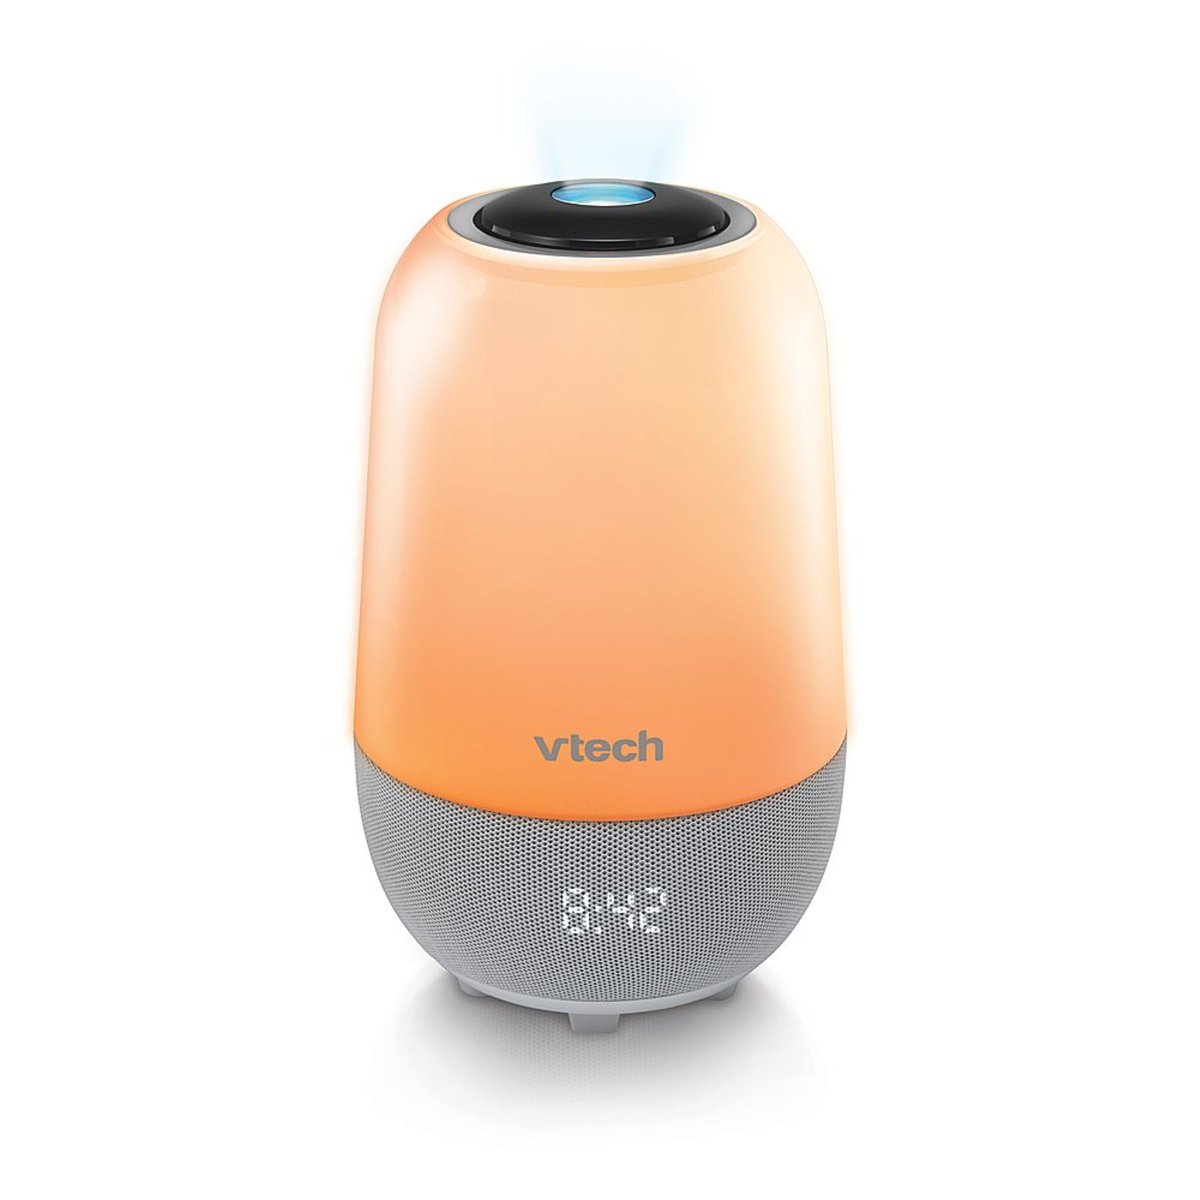 All-New VTech® Sleep Training Soothers Now Available Nationwide
 Today VTech® Communications, Inc., a leading manufacturer of award-winning baby monitors, announced the availability of its latest sleep soothers, designed to create ideal sleep patterns and environments for litt...